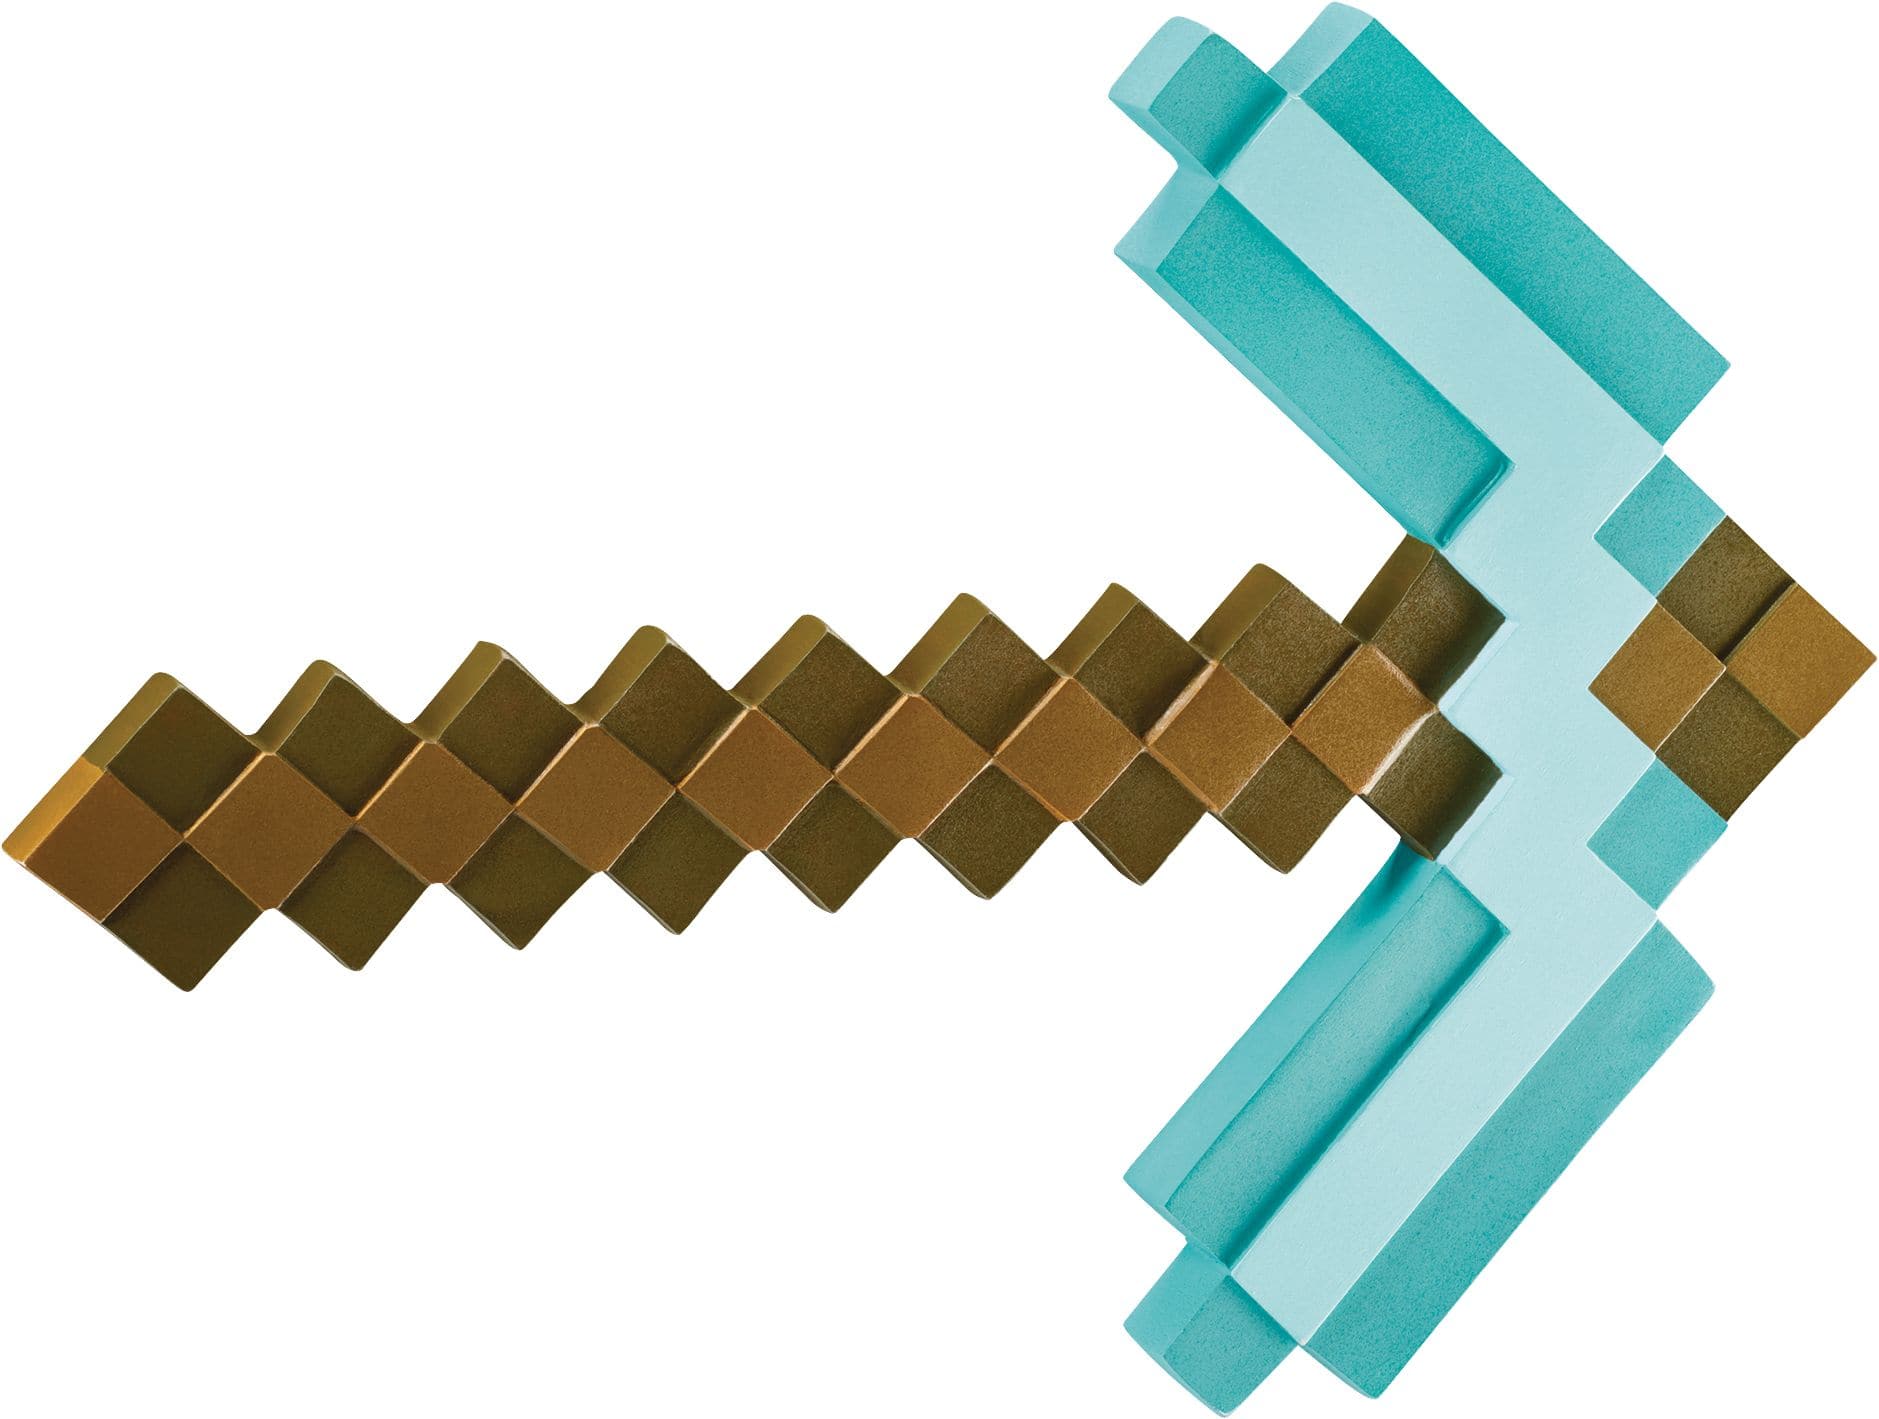 Minecraft Diamond Pickaxe Sword Pixelated Square Weapon, Blue/Brown, 16-in,  Wearable Costume Accessory for Halloween